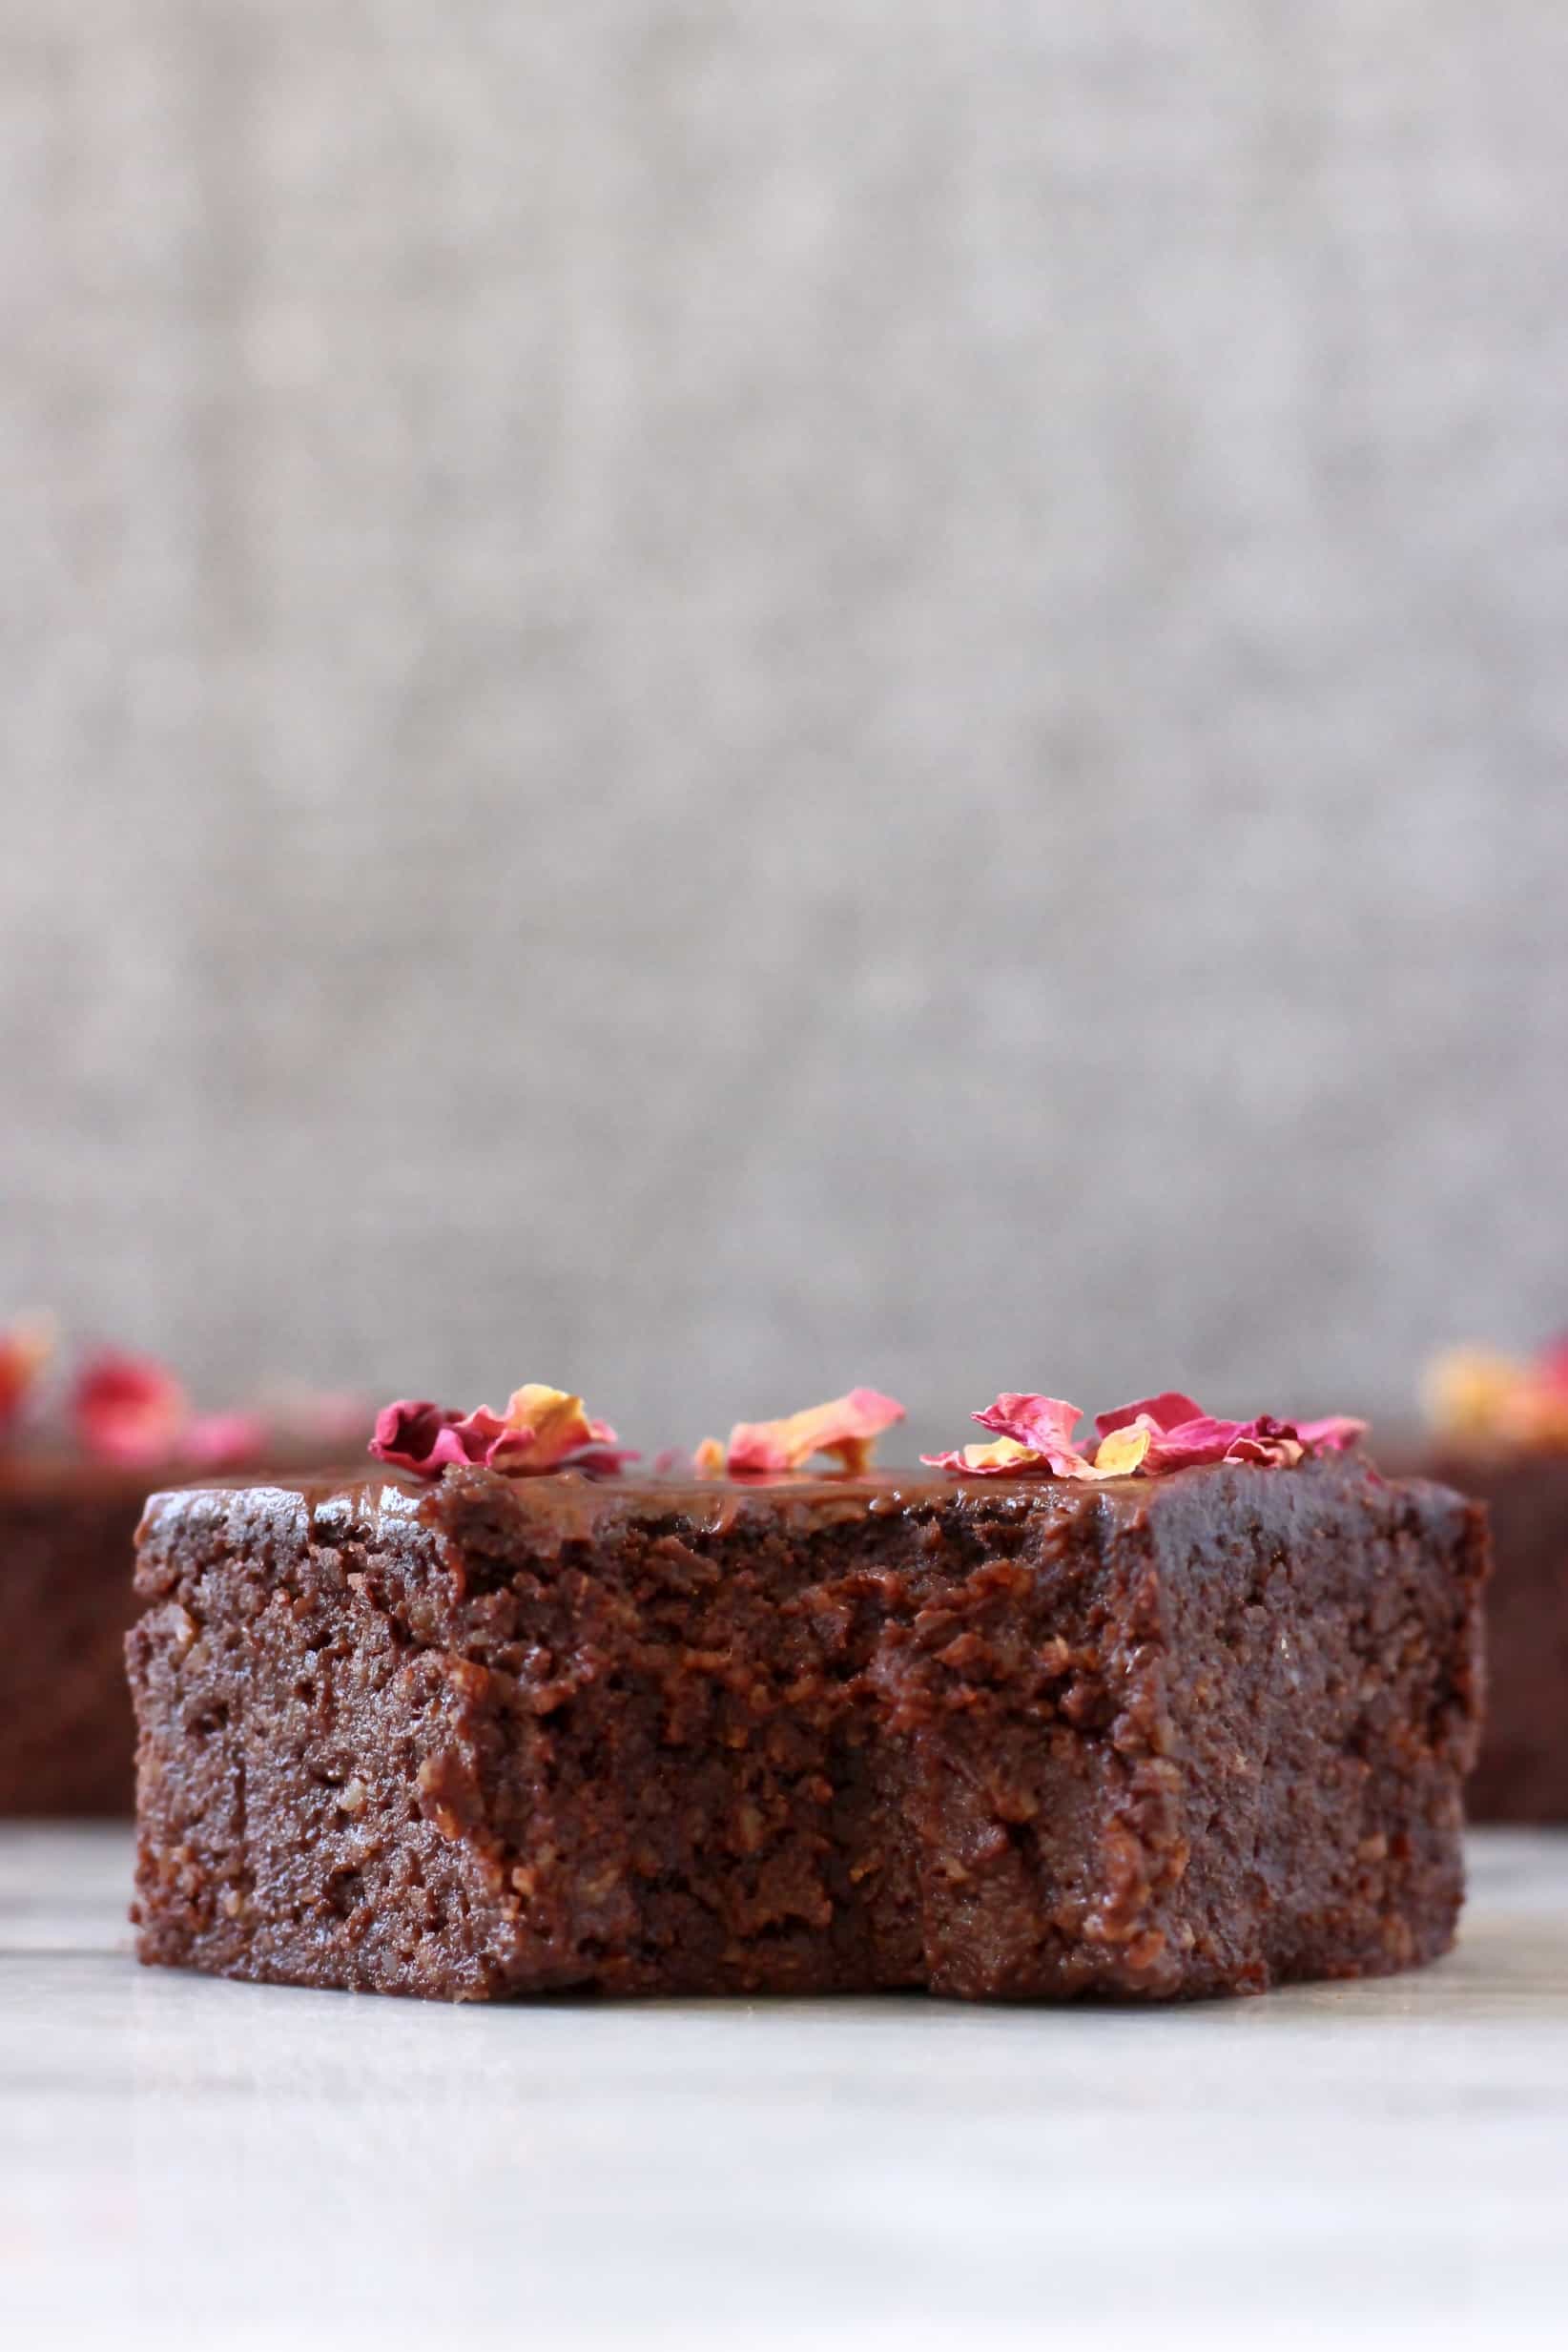 Three avocado brownies with chocolate frosting and rose petals with a bite taken out of one